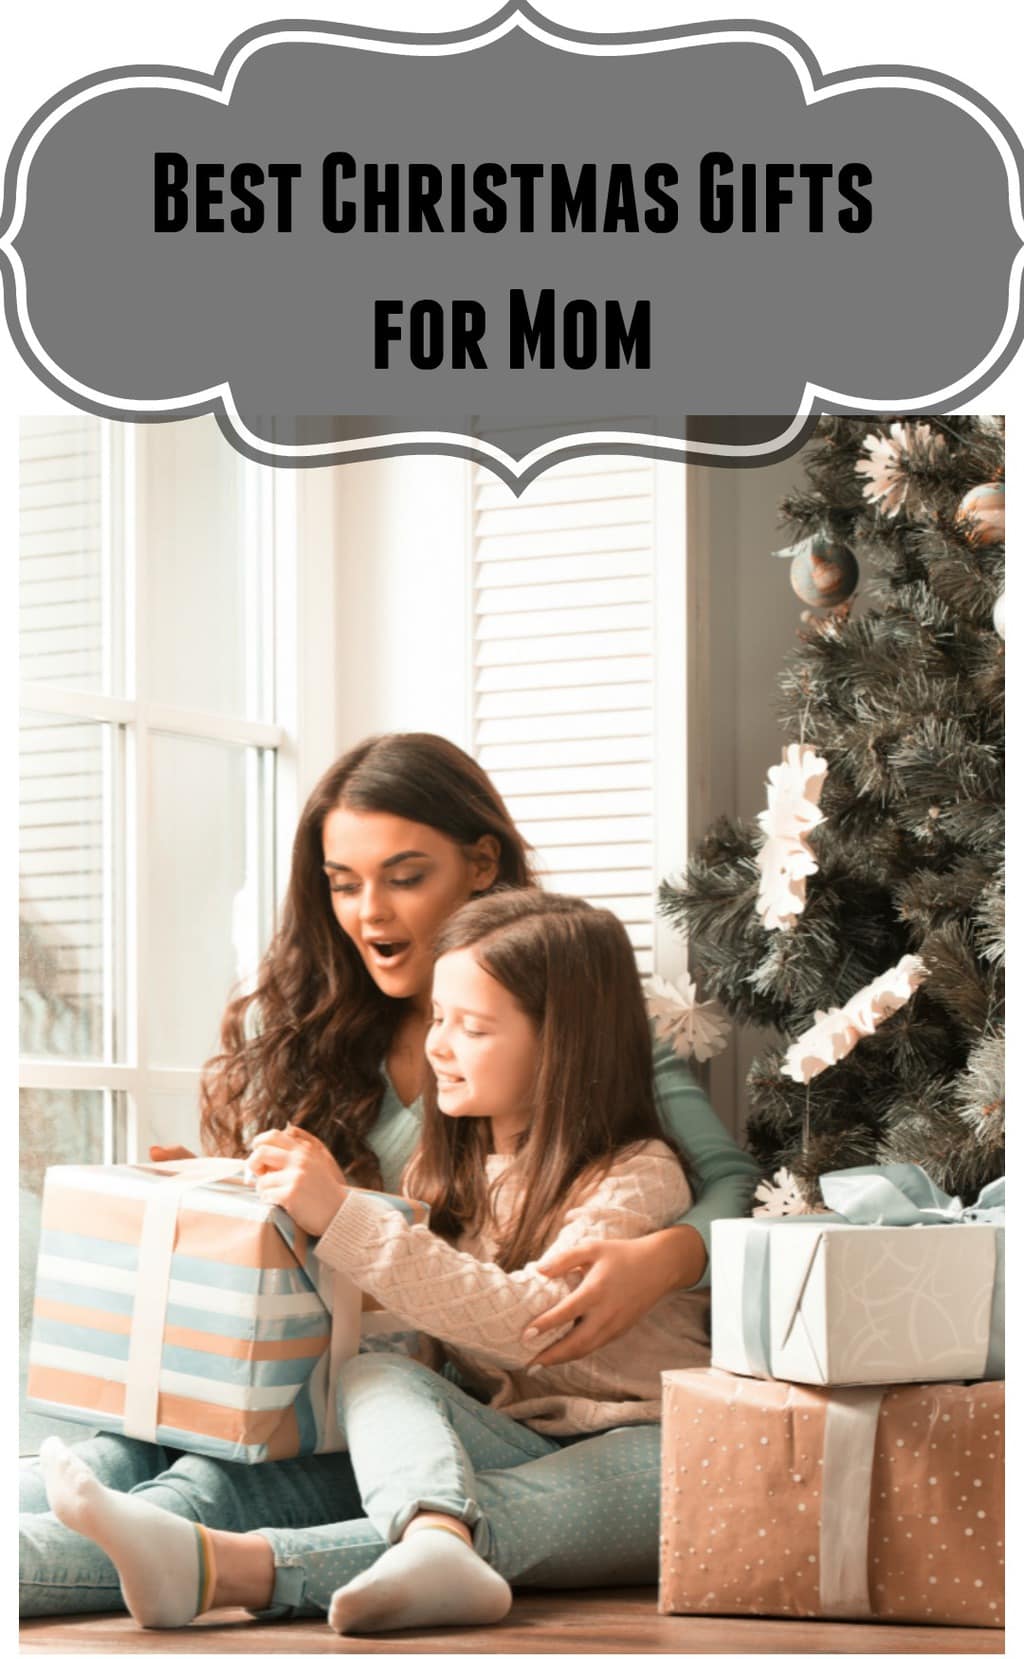 Best Christmas Gifts for Mom Popular Gift Ideas for Women